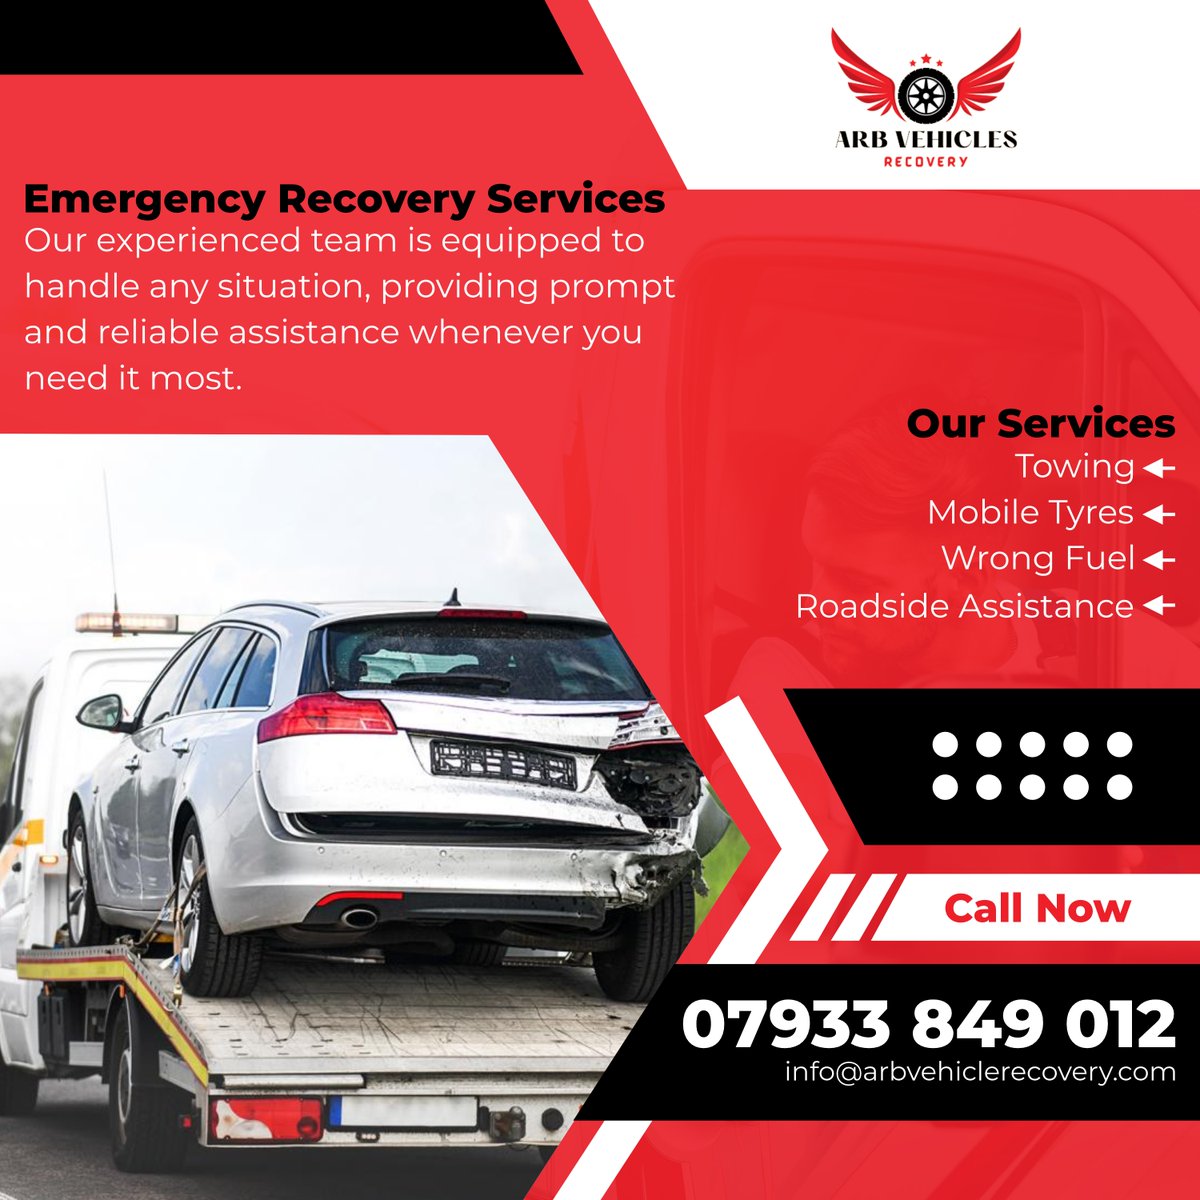 ARB Vehicle Recovery offers reliable emergency recovery services in Caistor Park Rd, London. Count on us for prompt assistance when your vehicle breaks down unexpectedly.
arbvehiclerecovery.co.uk
#EmergencyRecovery
#VehicleRecovery
#RoadsideAssistance
#TowTruckService
#CarRecovery